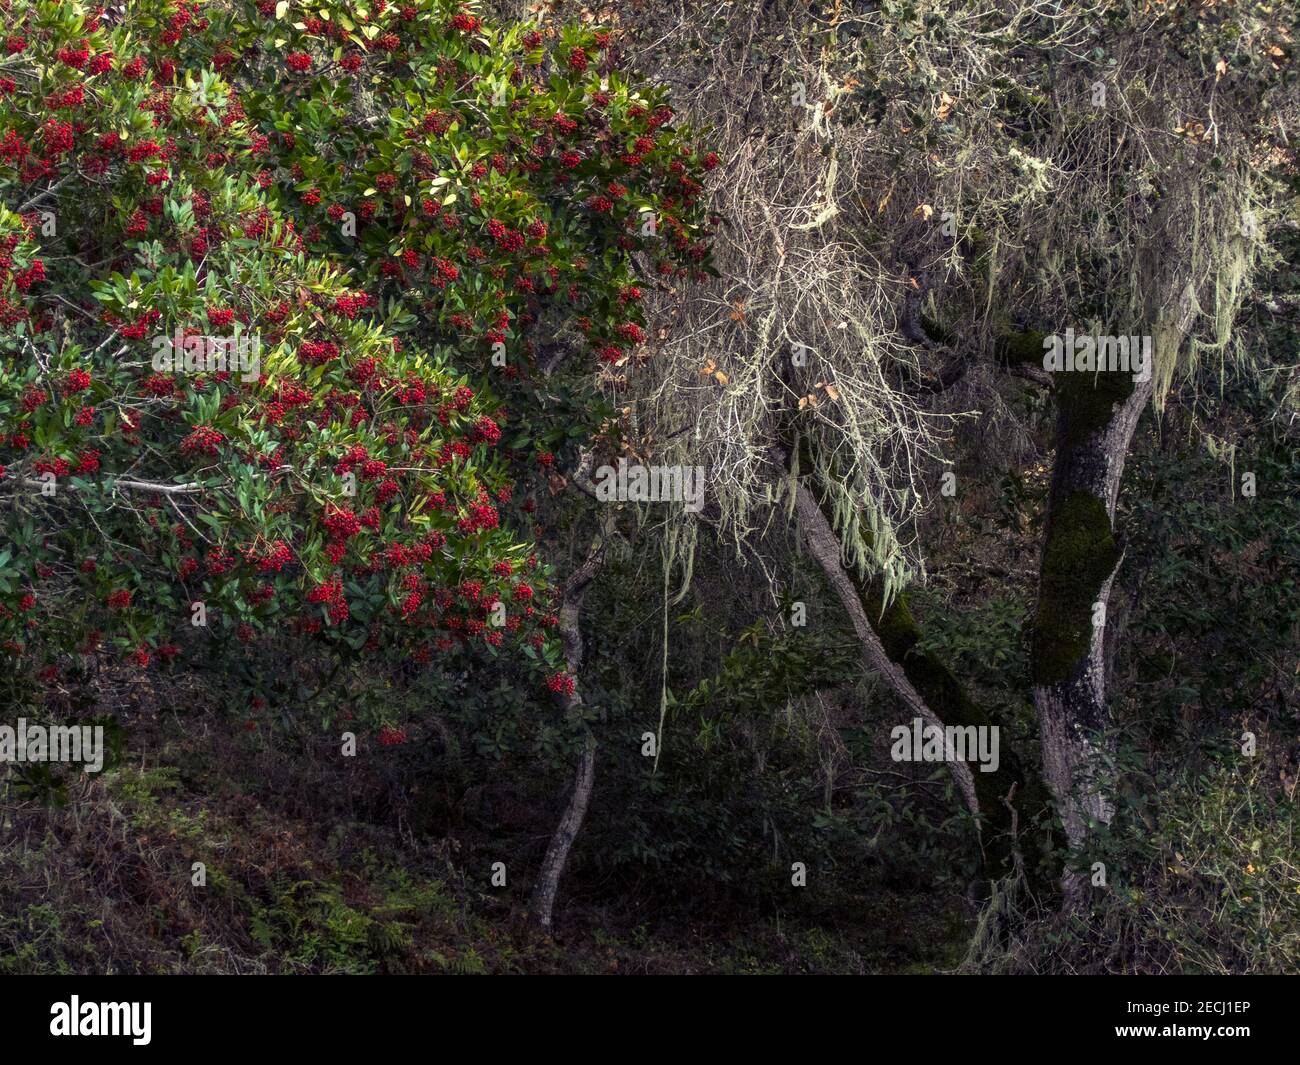 Scarlet berries adorn a California bay tree (Umbellularia californica) as lichens cover an adjacent bay tree (dead) at Garland Ranch Regional Park. Stock Photo